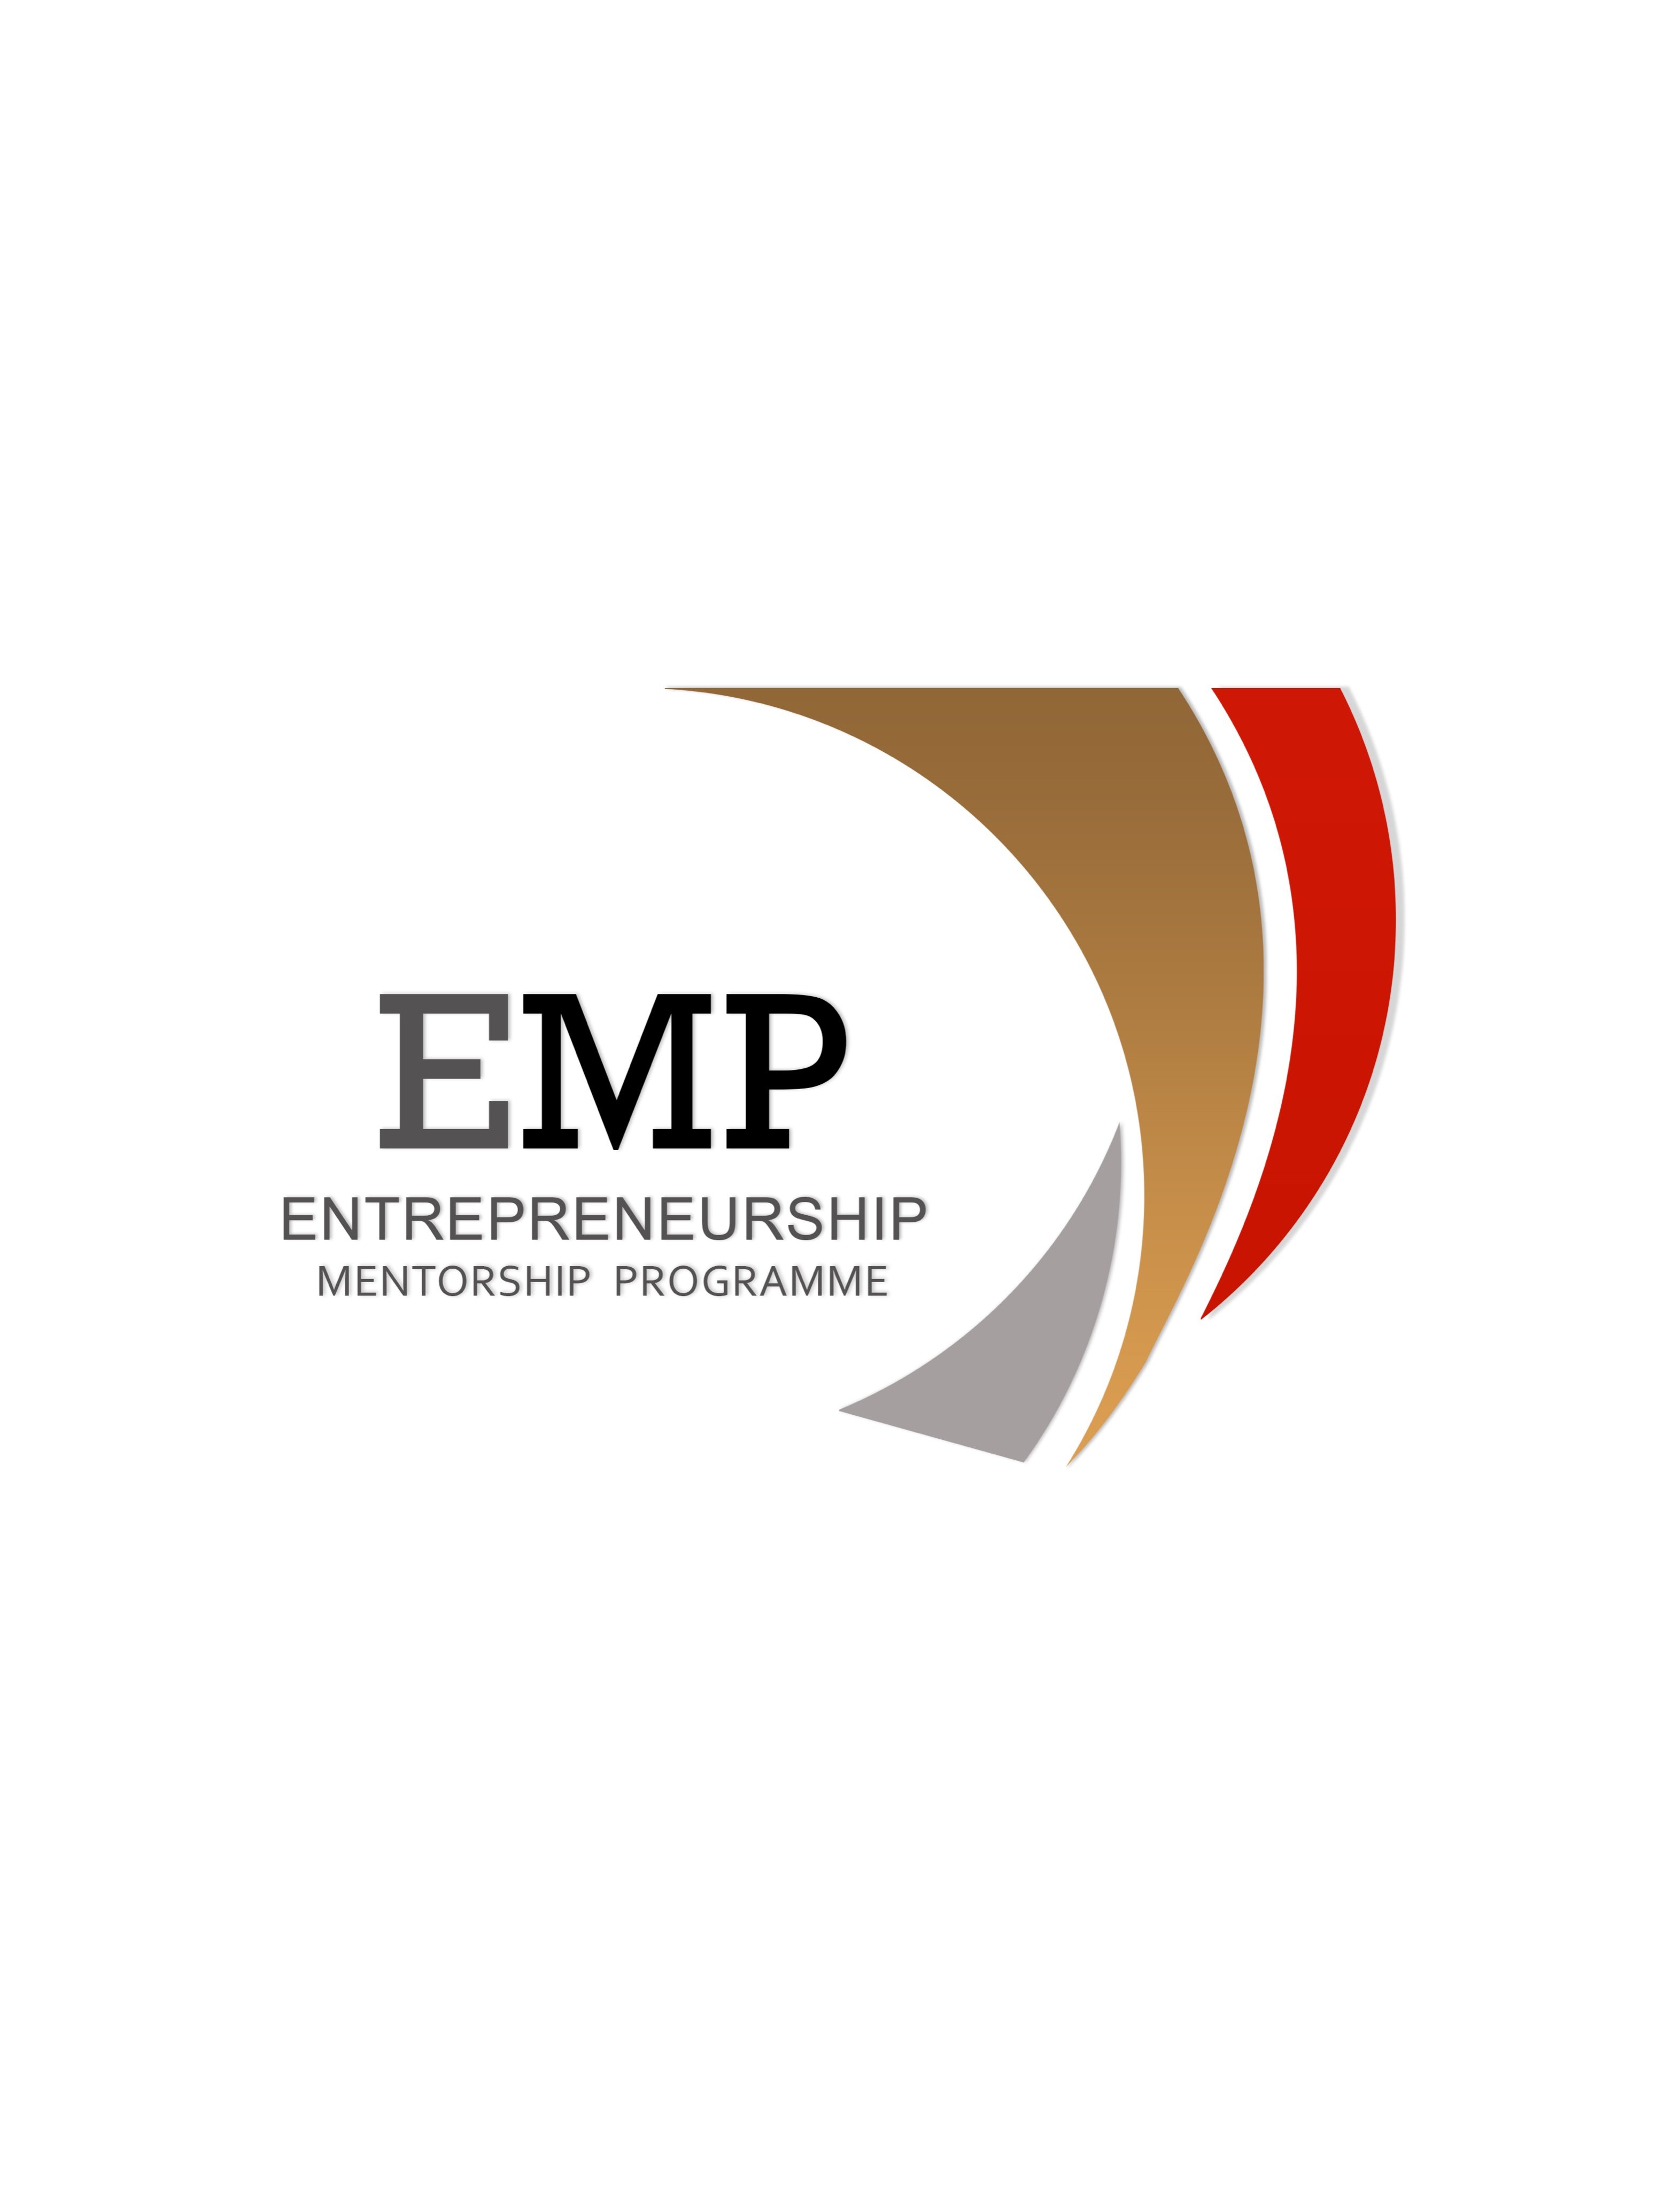 EMP gives learners with zero capital an opportunity to handle/manage actual money, run and manage a very small scale business.